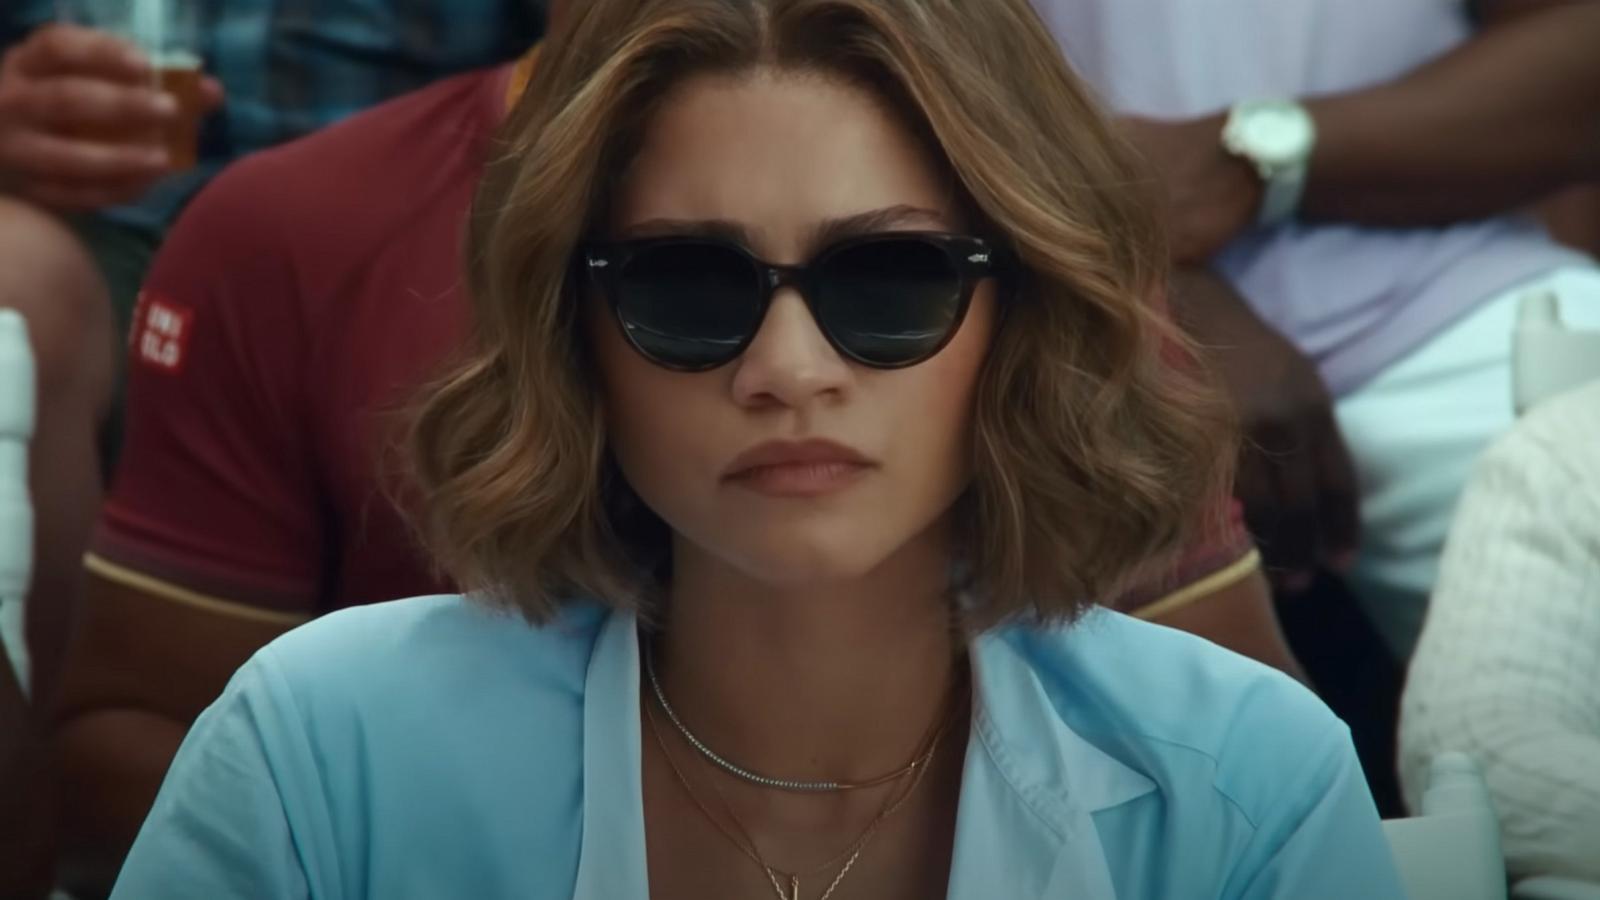 PHOTO: Zendaya appears in the trailer for the film "Challengers."